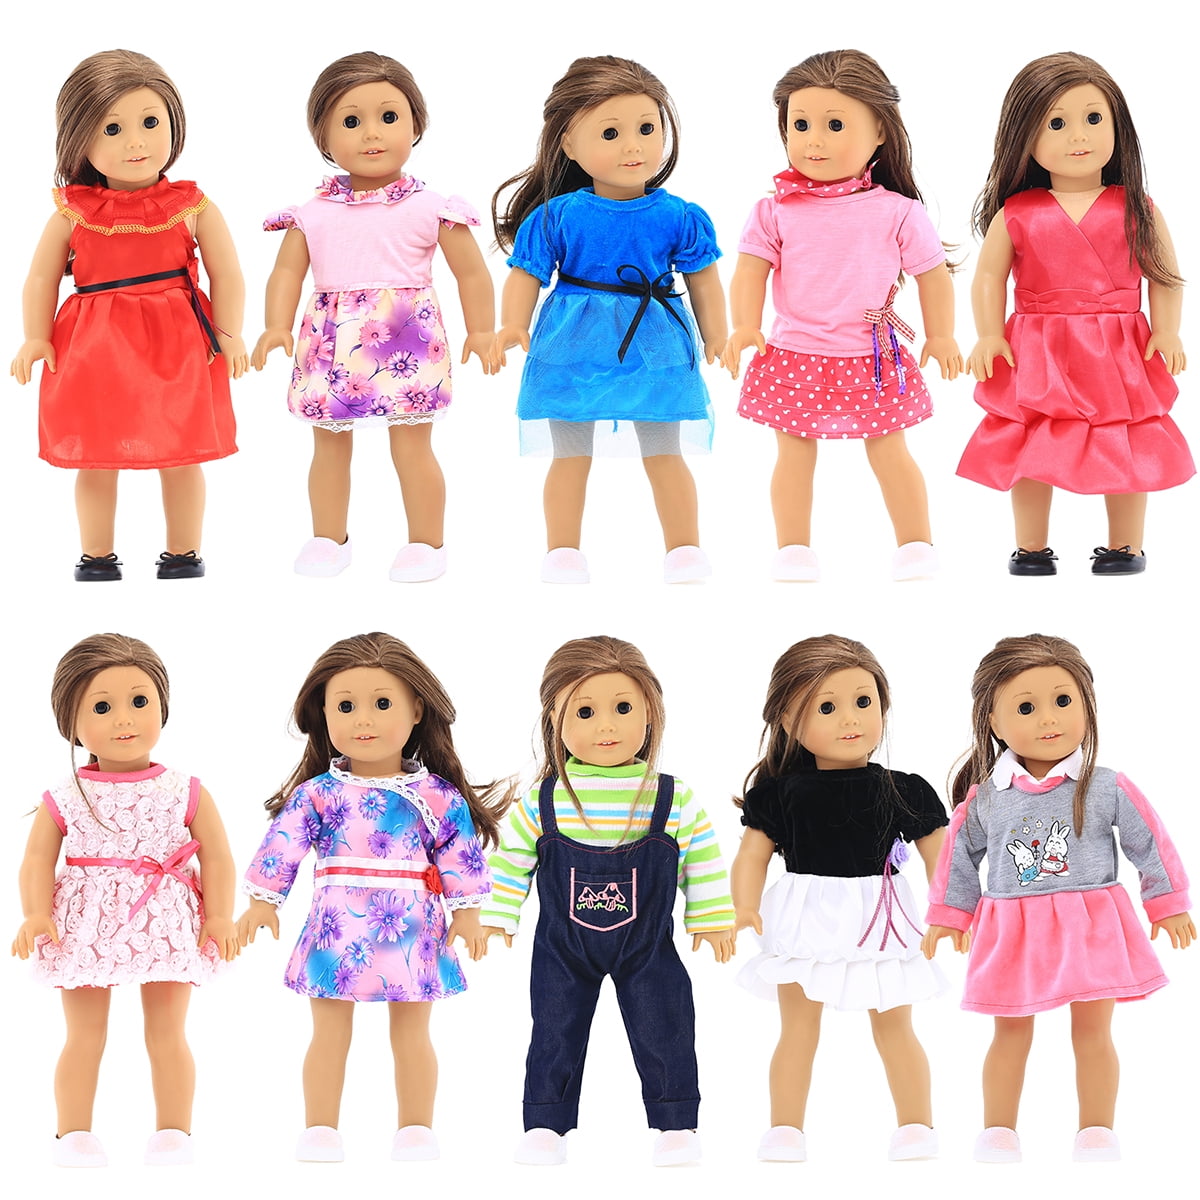 Doll Clothes Dress Outfits Pajames For 18 inch American Girl Our Generation Accs